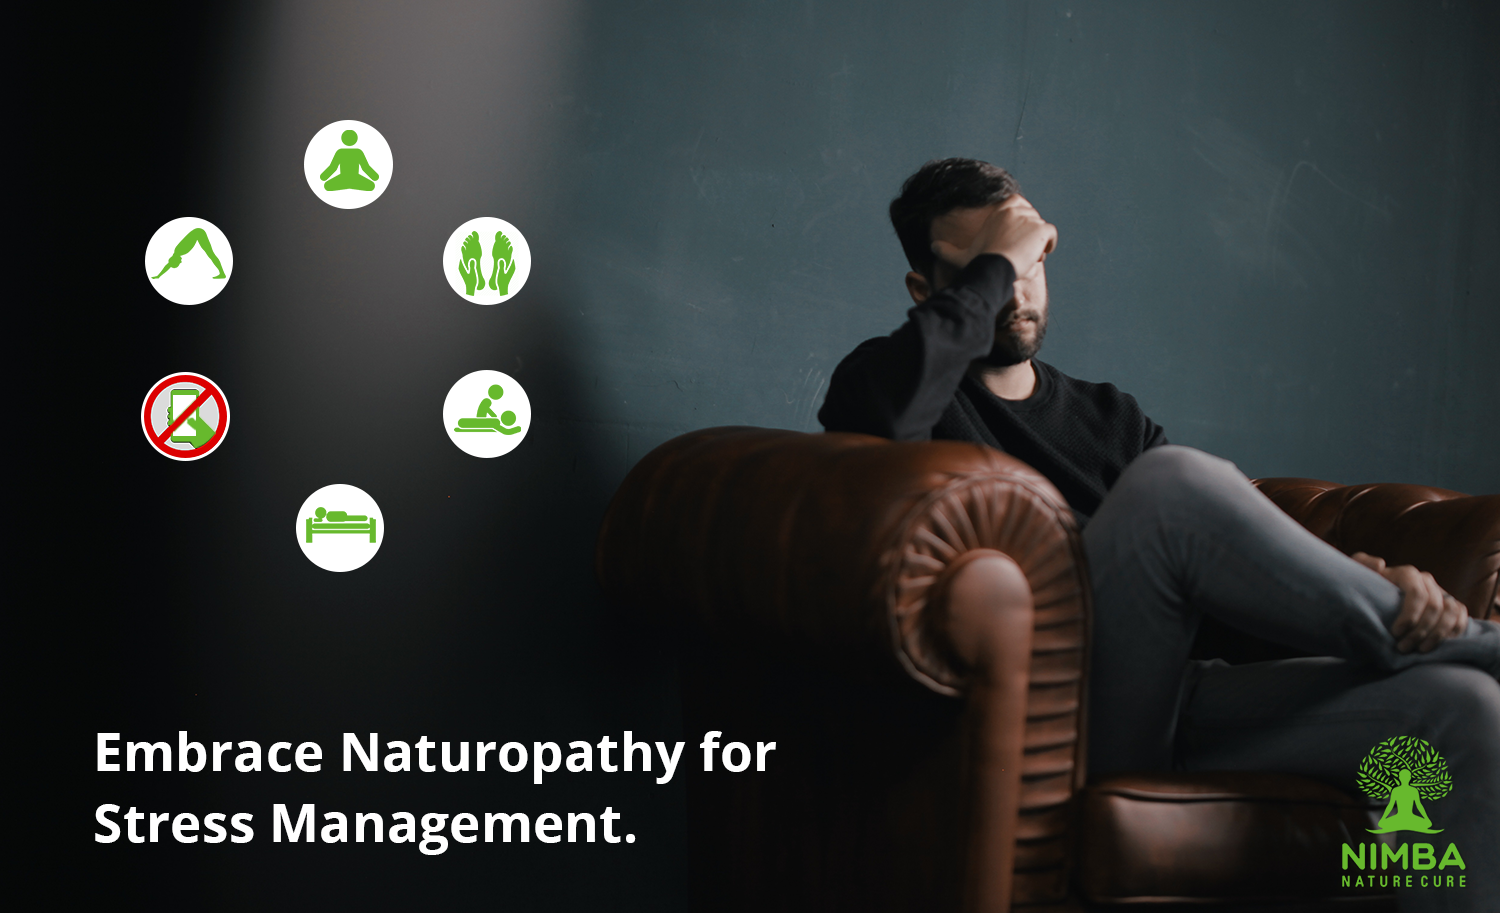 Naturopathy for stress management